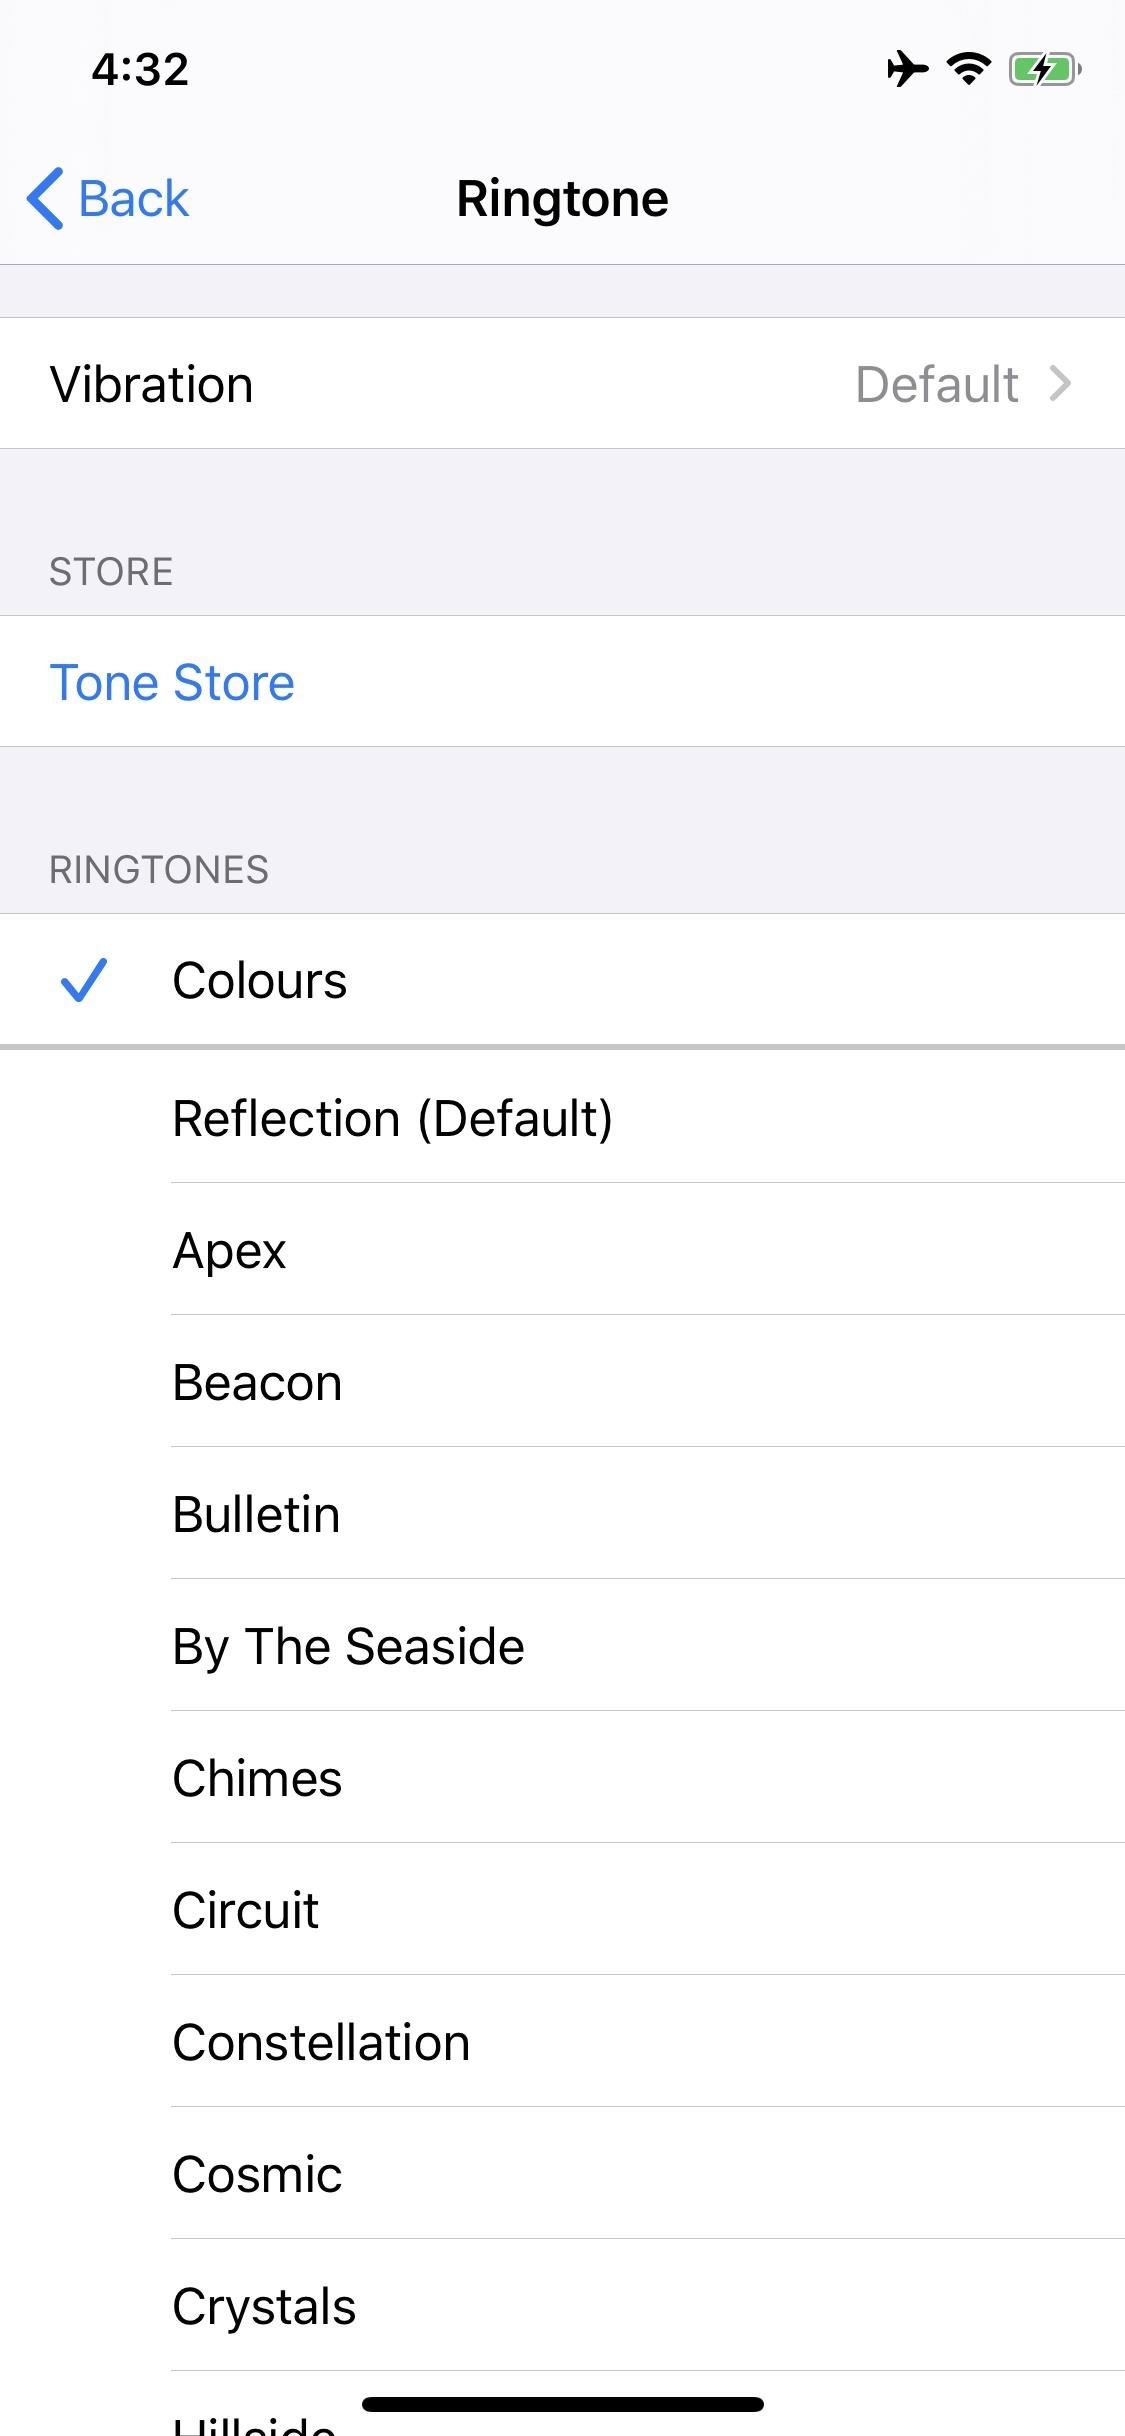 How to Create Ringtones for Your iPhone Using 'Music' in macOS 10.15 Catalina